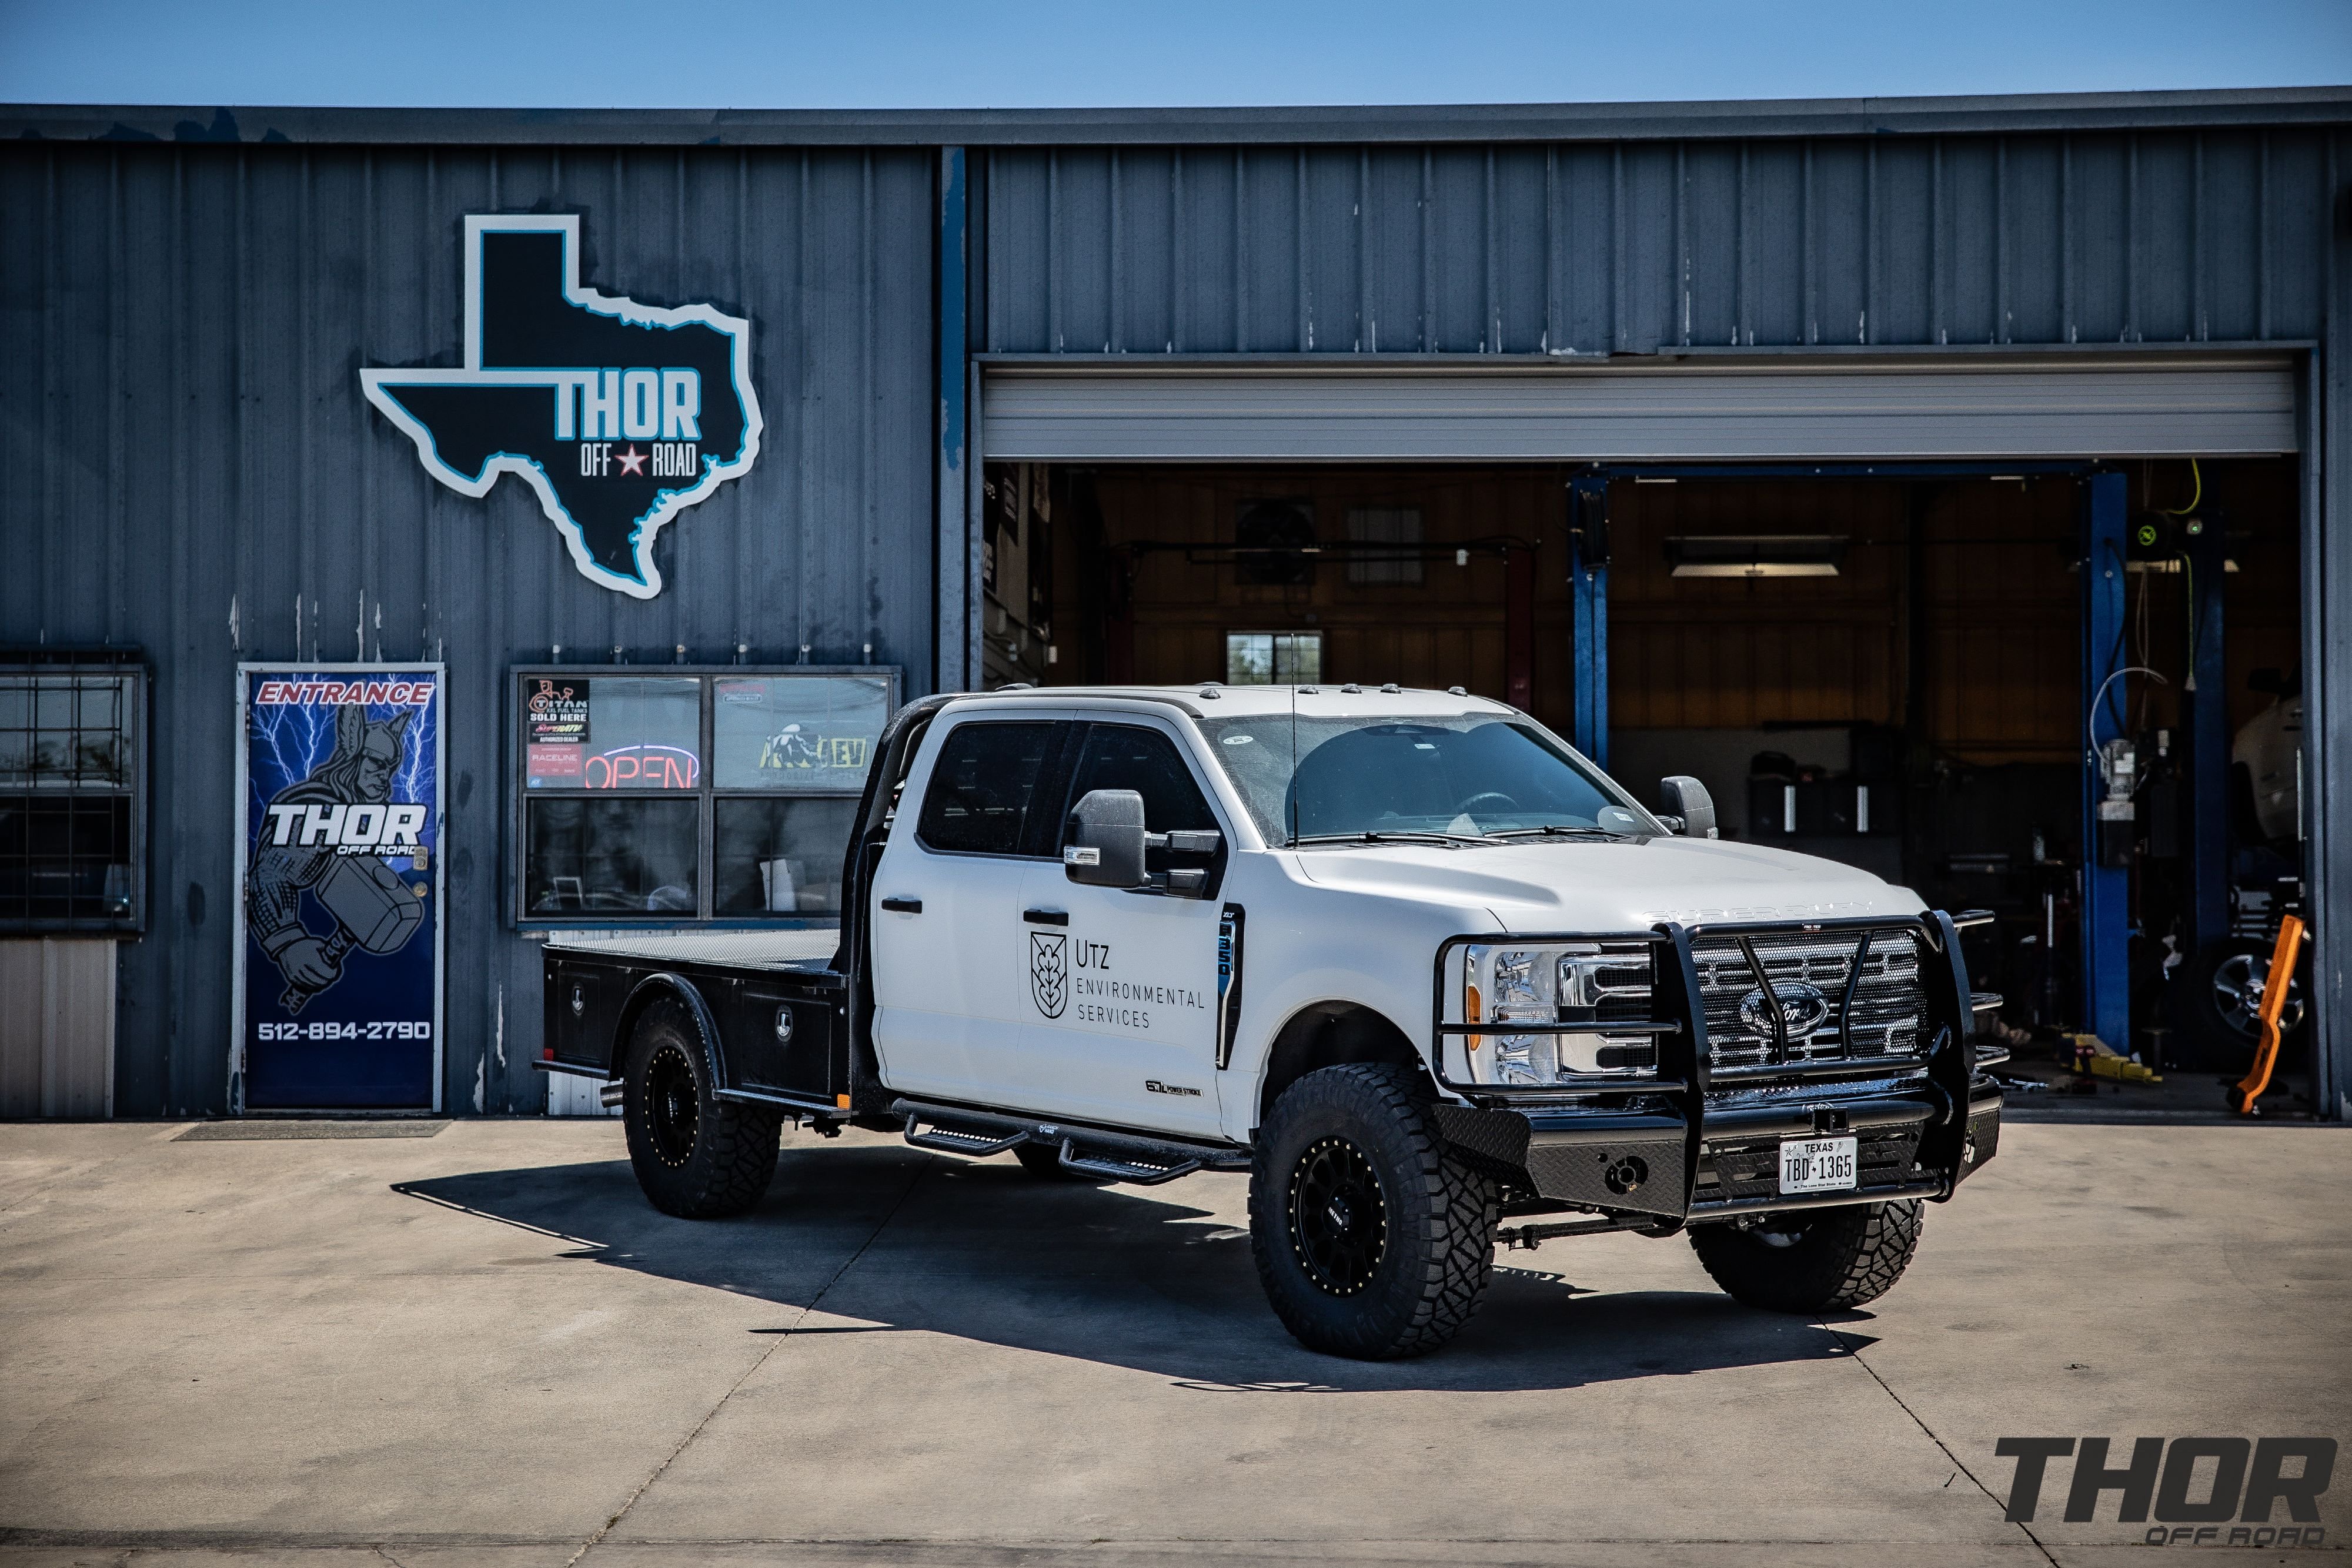 2023 Ford F-350 Super Duty XLT in White with Ready Lift 2.5" Leveling System, 18x9" Method 305 Matte Black Wheels, 35x12.50R18 Nitto Ridge Grappler Tires, Frontier Front Bumper, Air Lift LoadLifter 5000 Ultimate